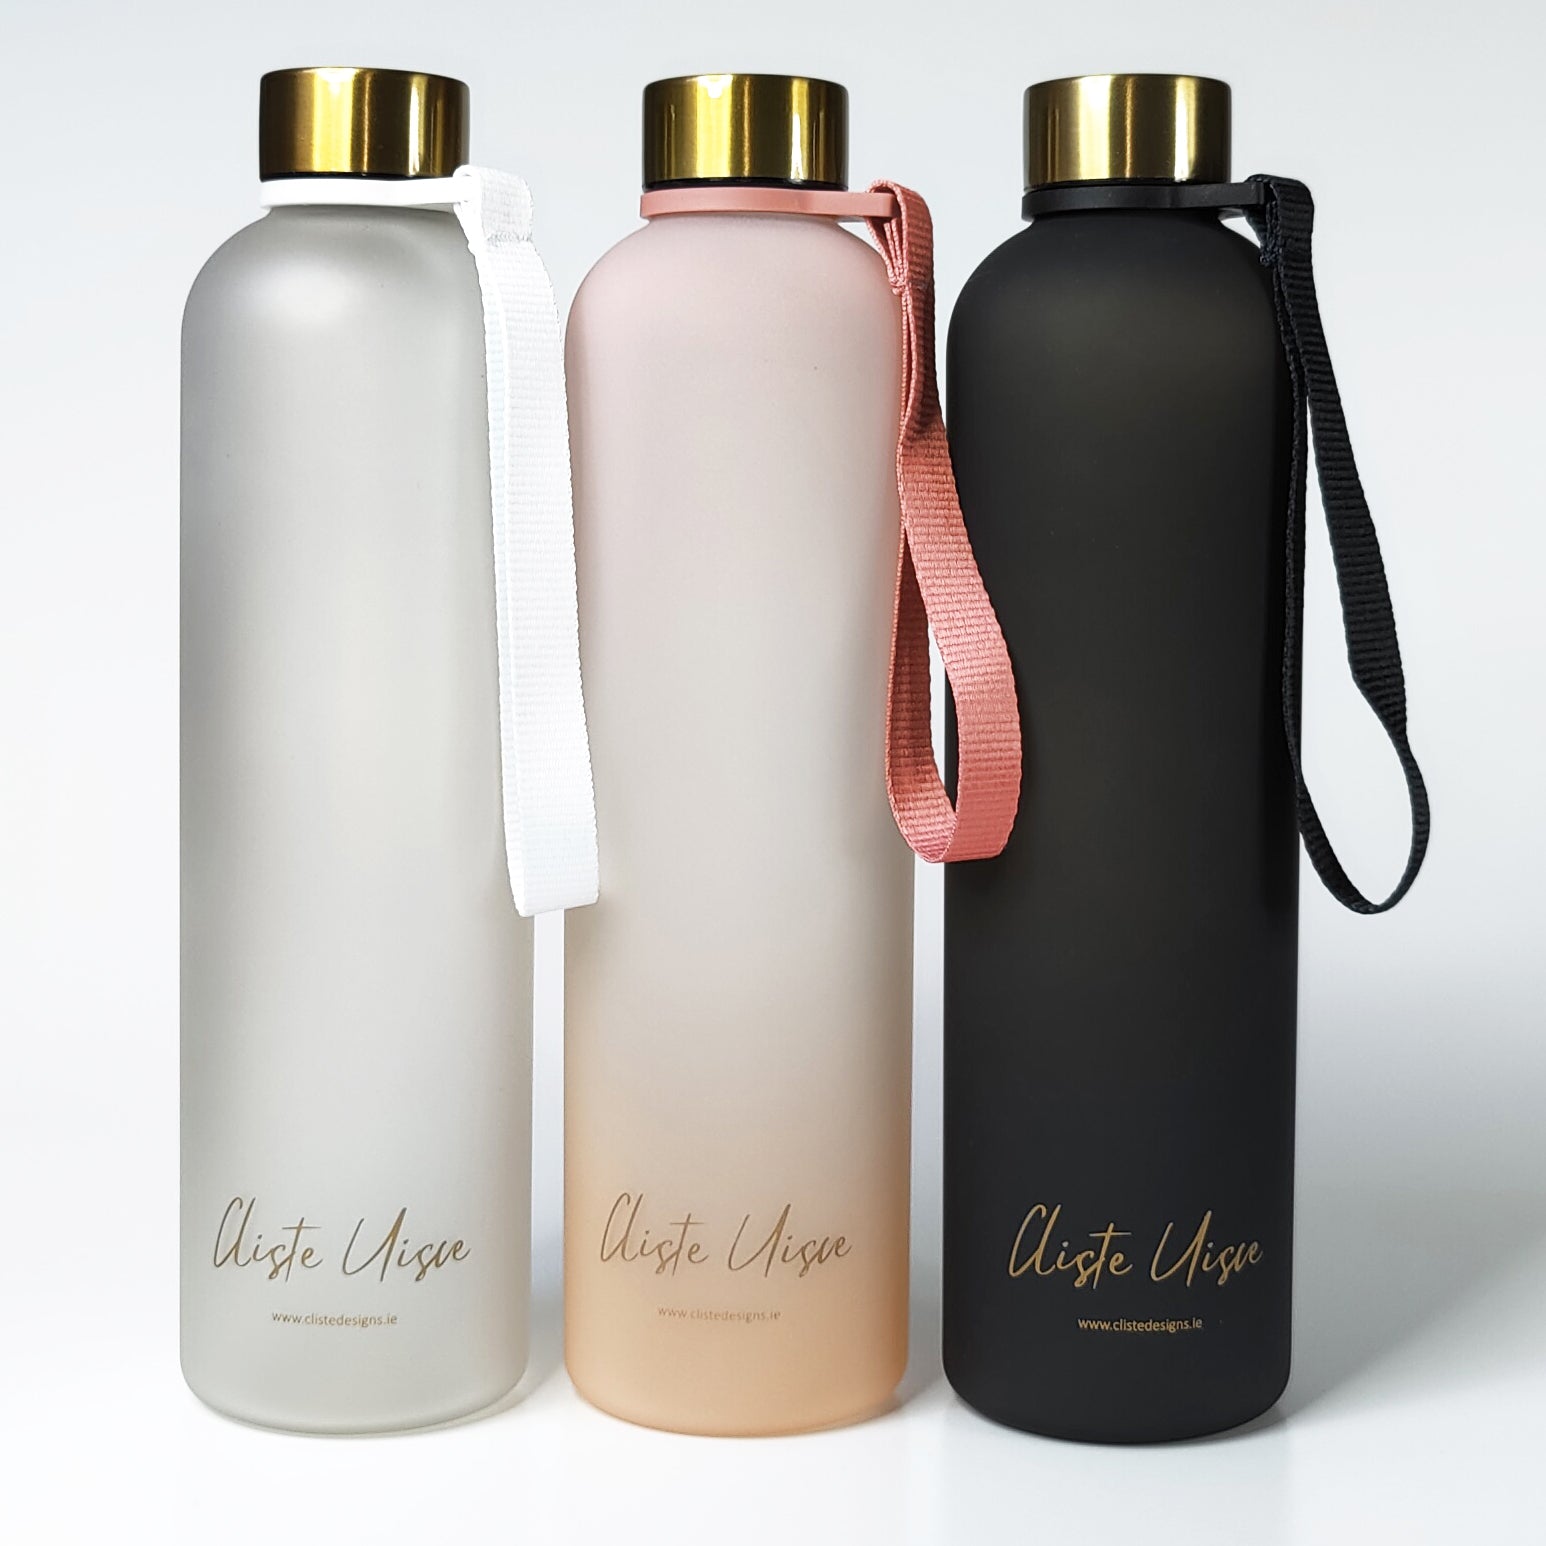 Cliste Uisce Water Bottle | STOCK CLEARANCE - Cliste Designs｜Cliste Co